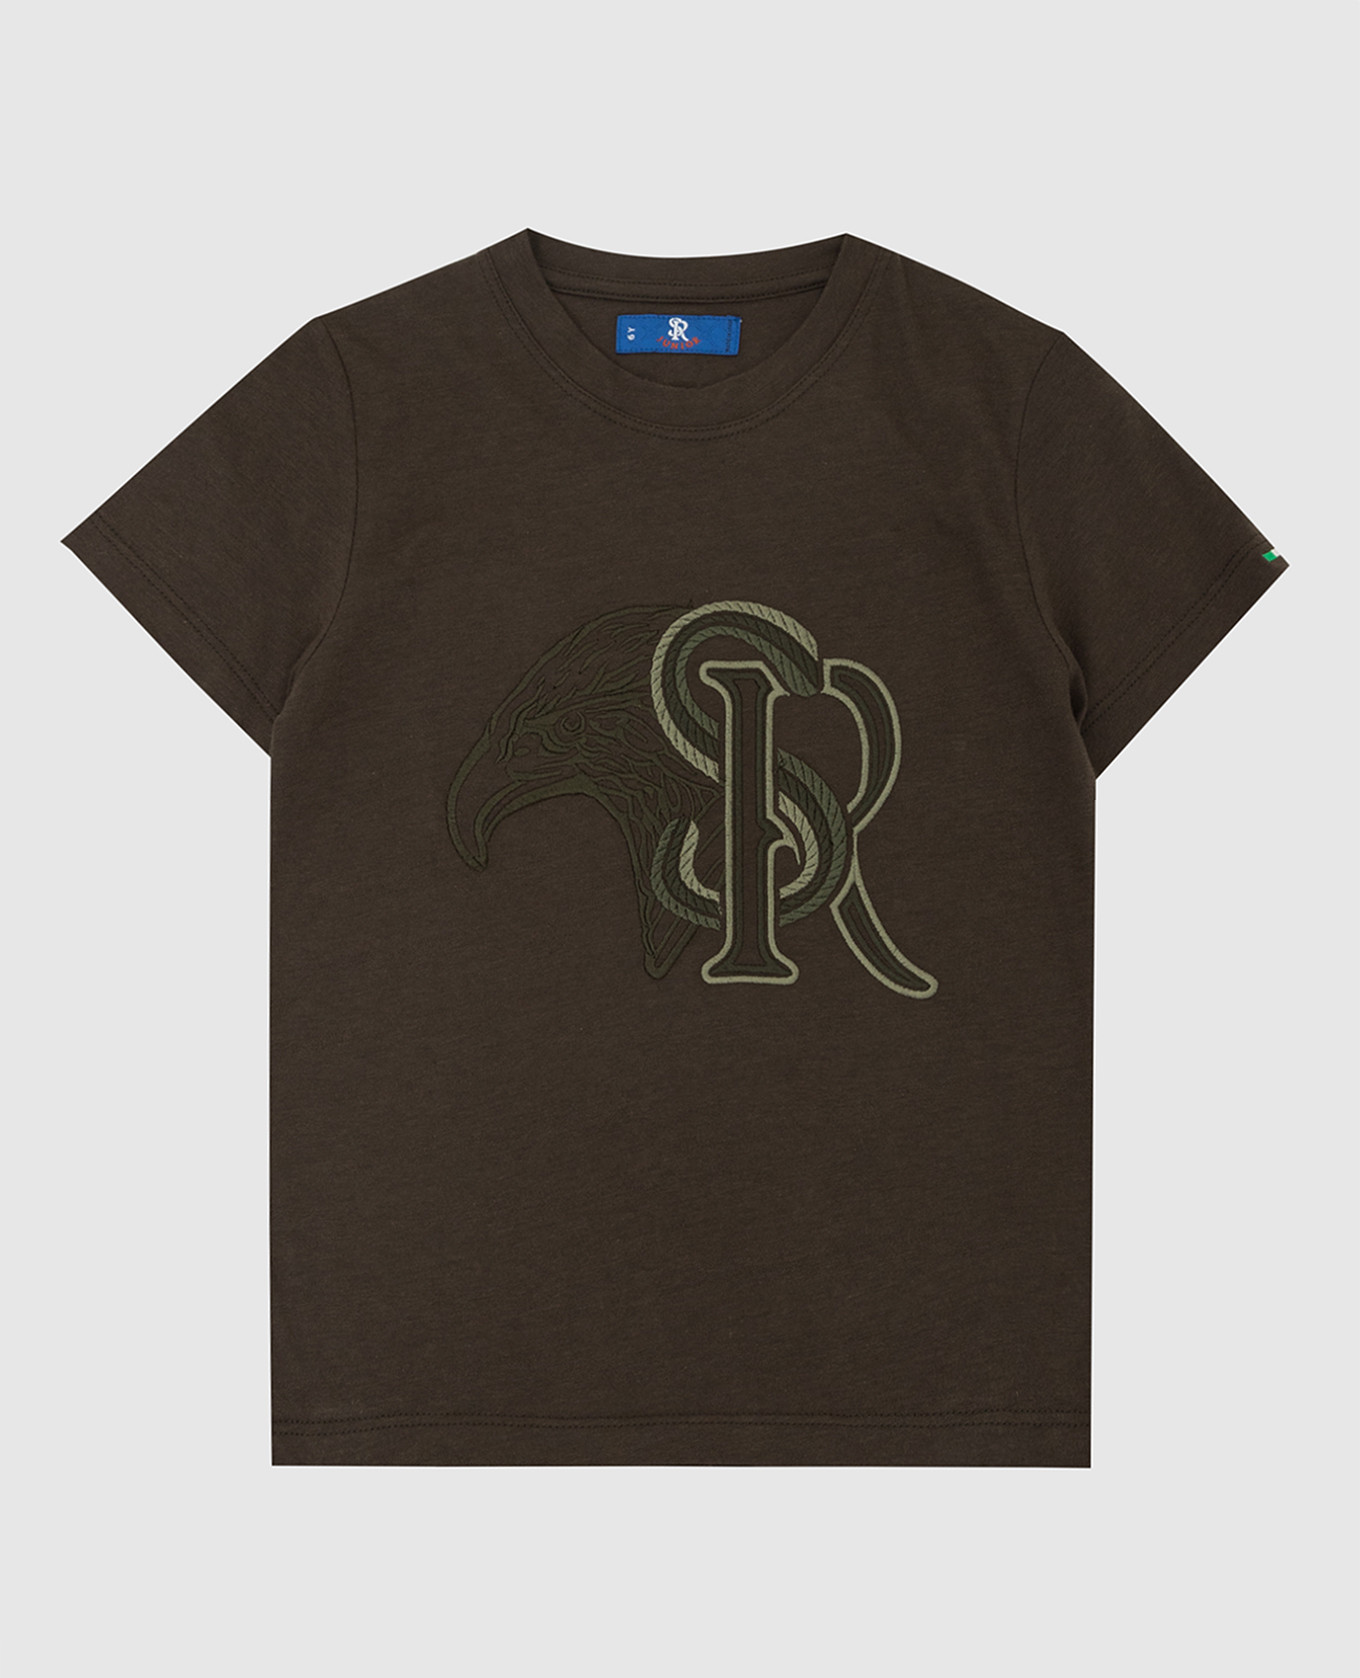 Khaki children's T-shirt with logo embroidery